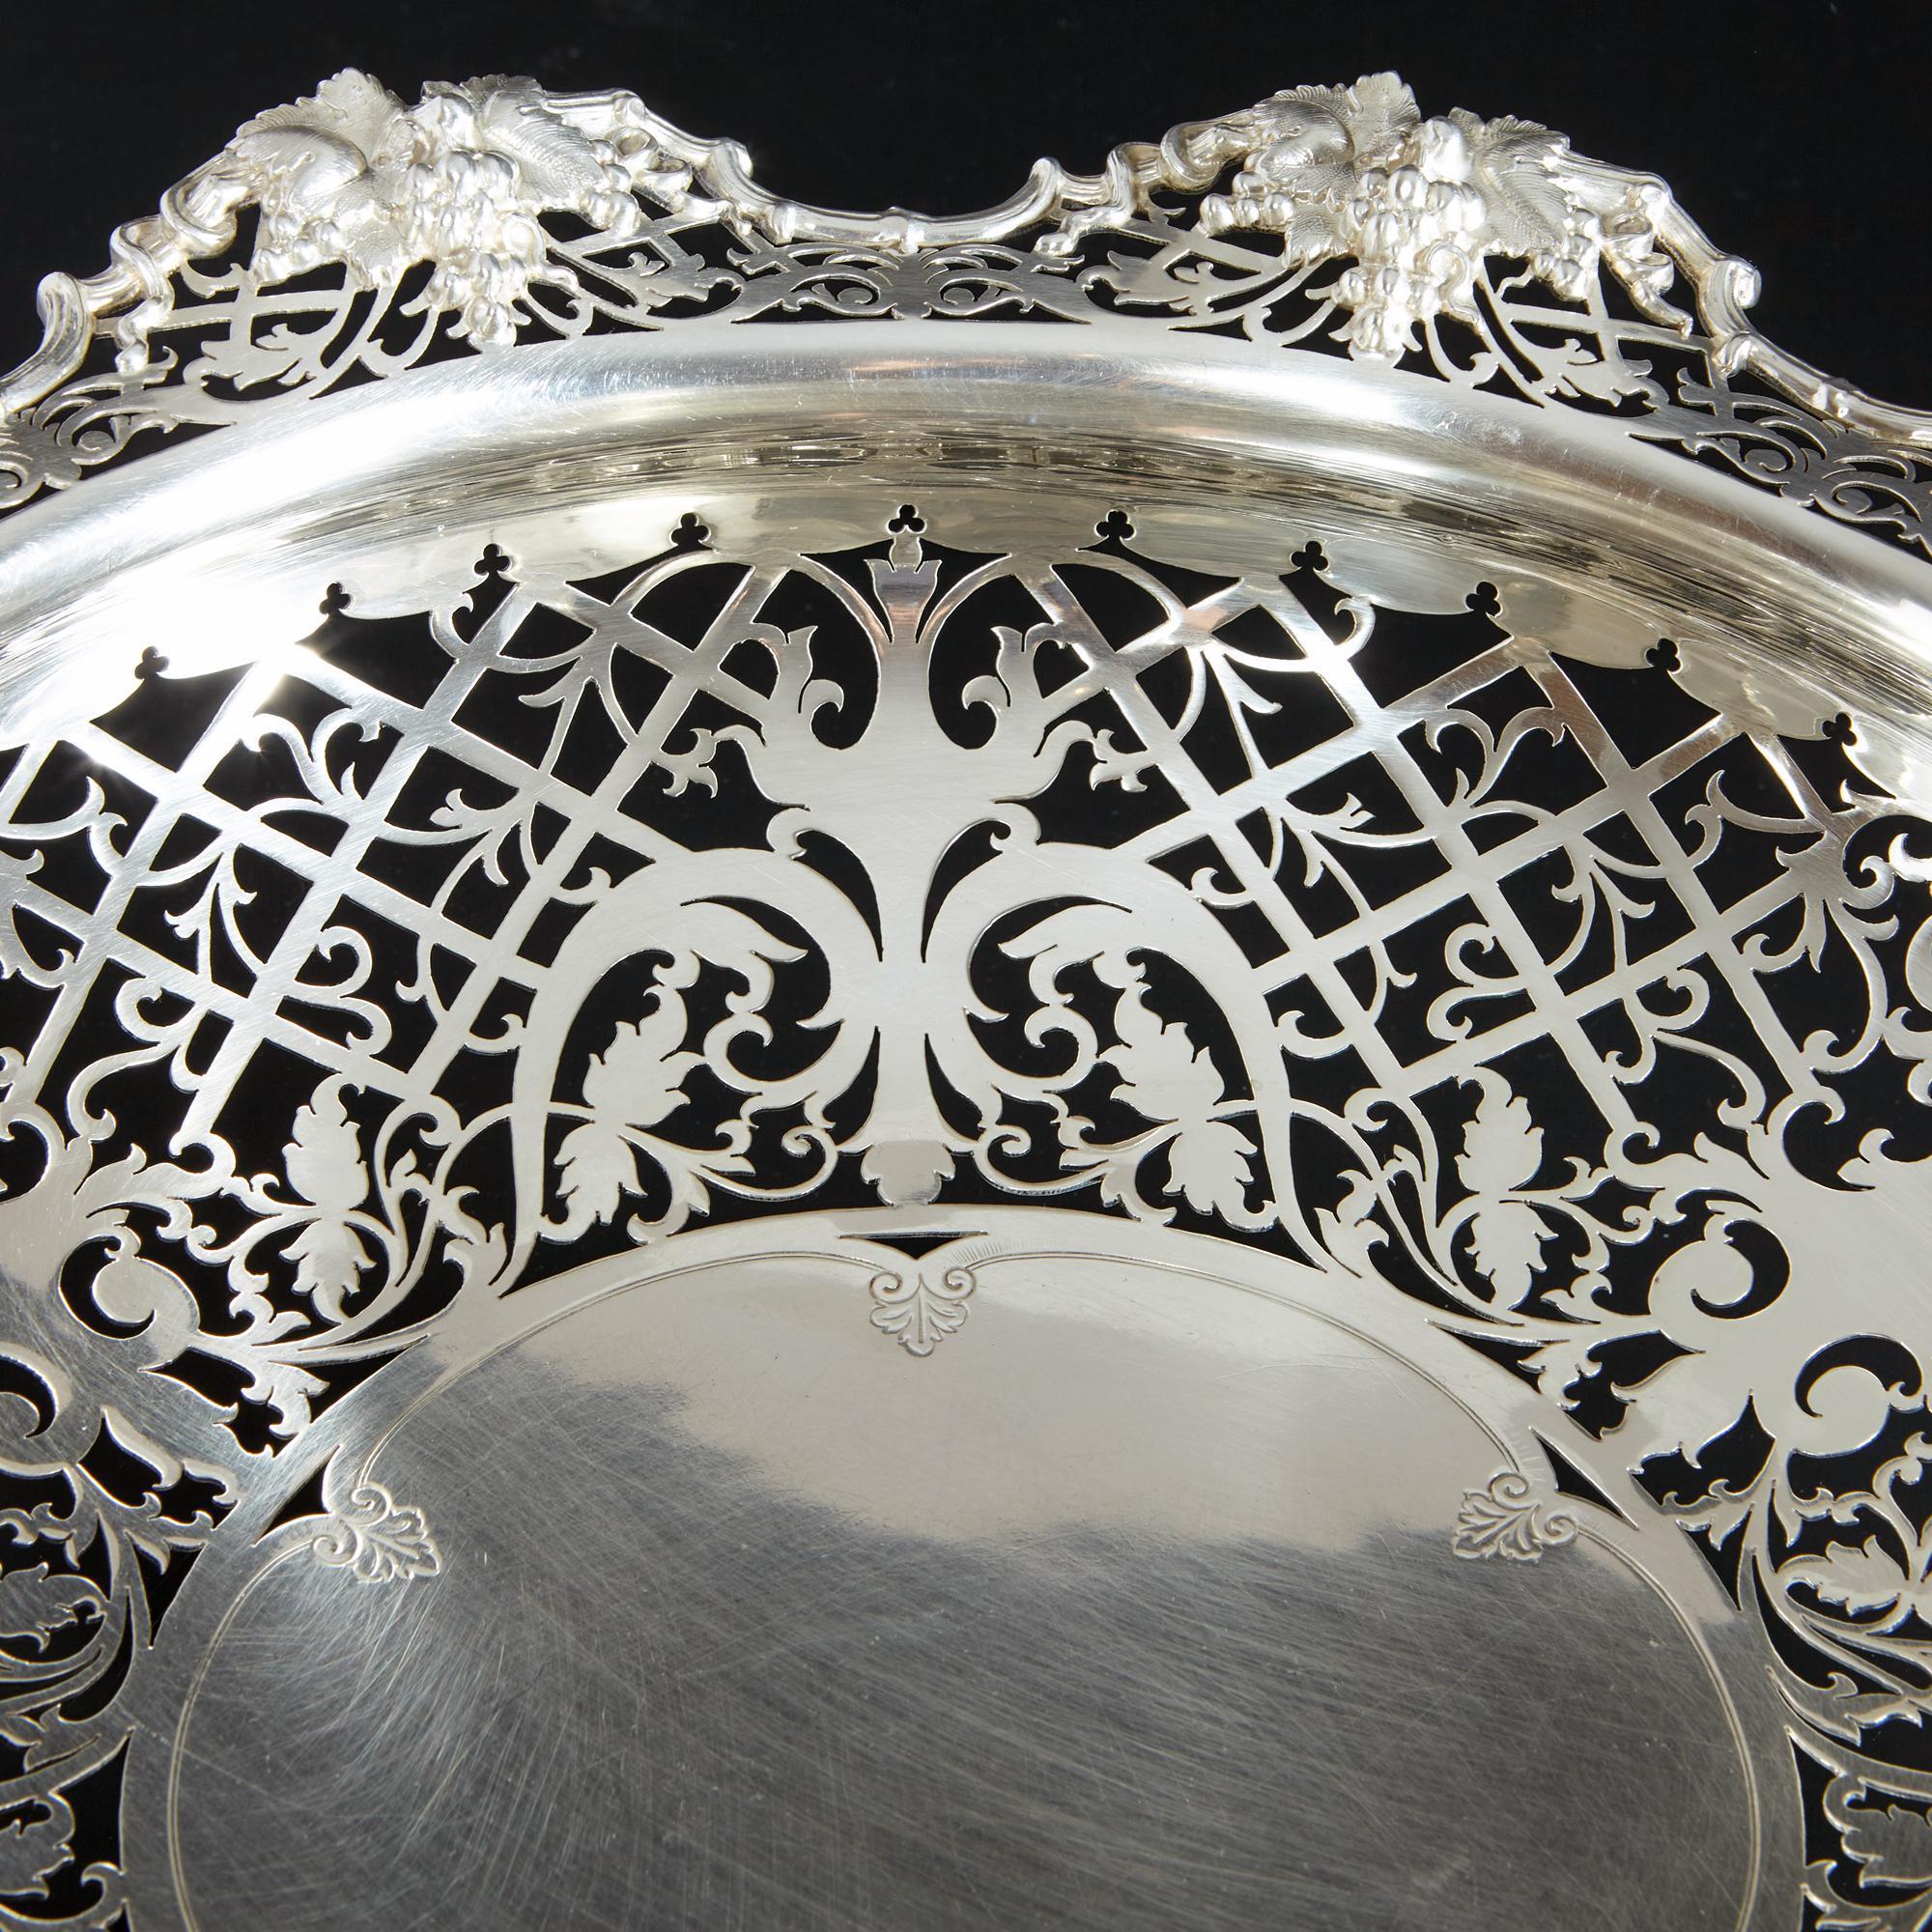 Early 20th Century Large Antique Hand-Pierced Silver Basket